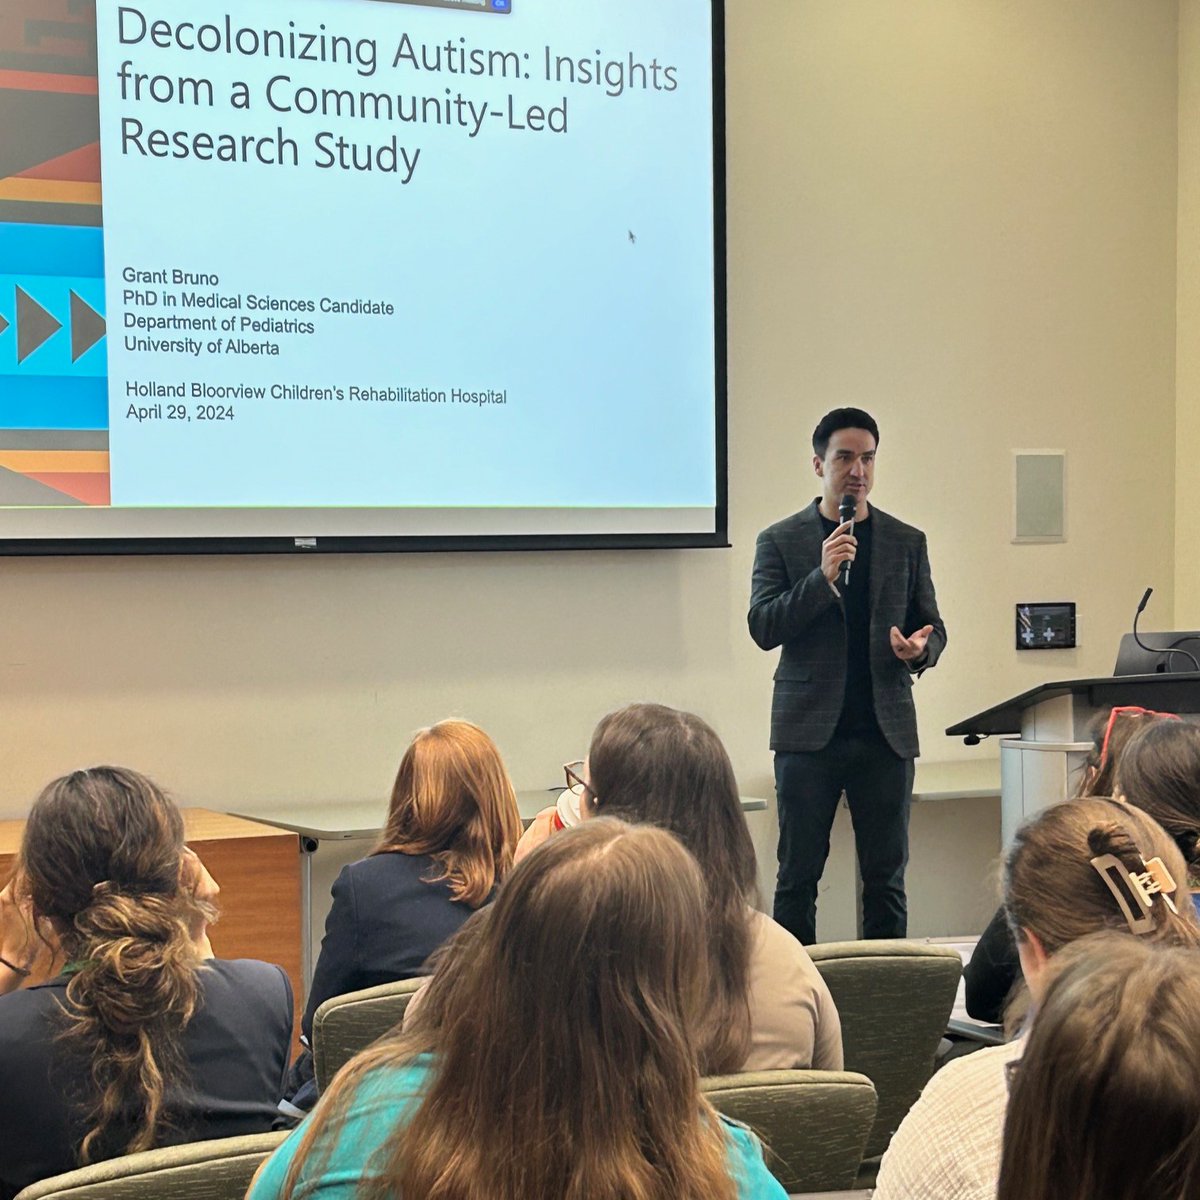 The Bloorview Research Institute, in collaboration with the IDEAA office, is pleased to have Grant Bruno, a PhD candidate in medical sciences at @UAlberta’s Department of Pediatrics, explore #autism in First Nations communities through a Nehiyaw lens.